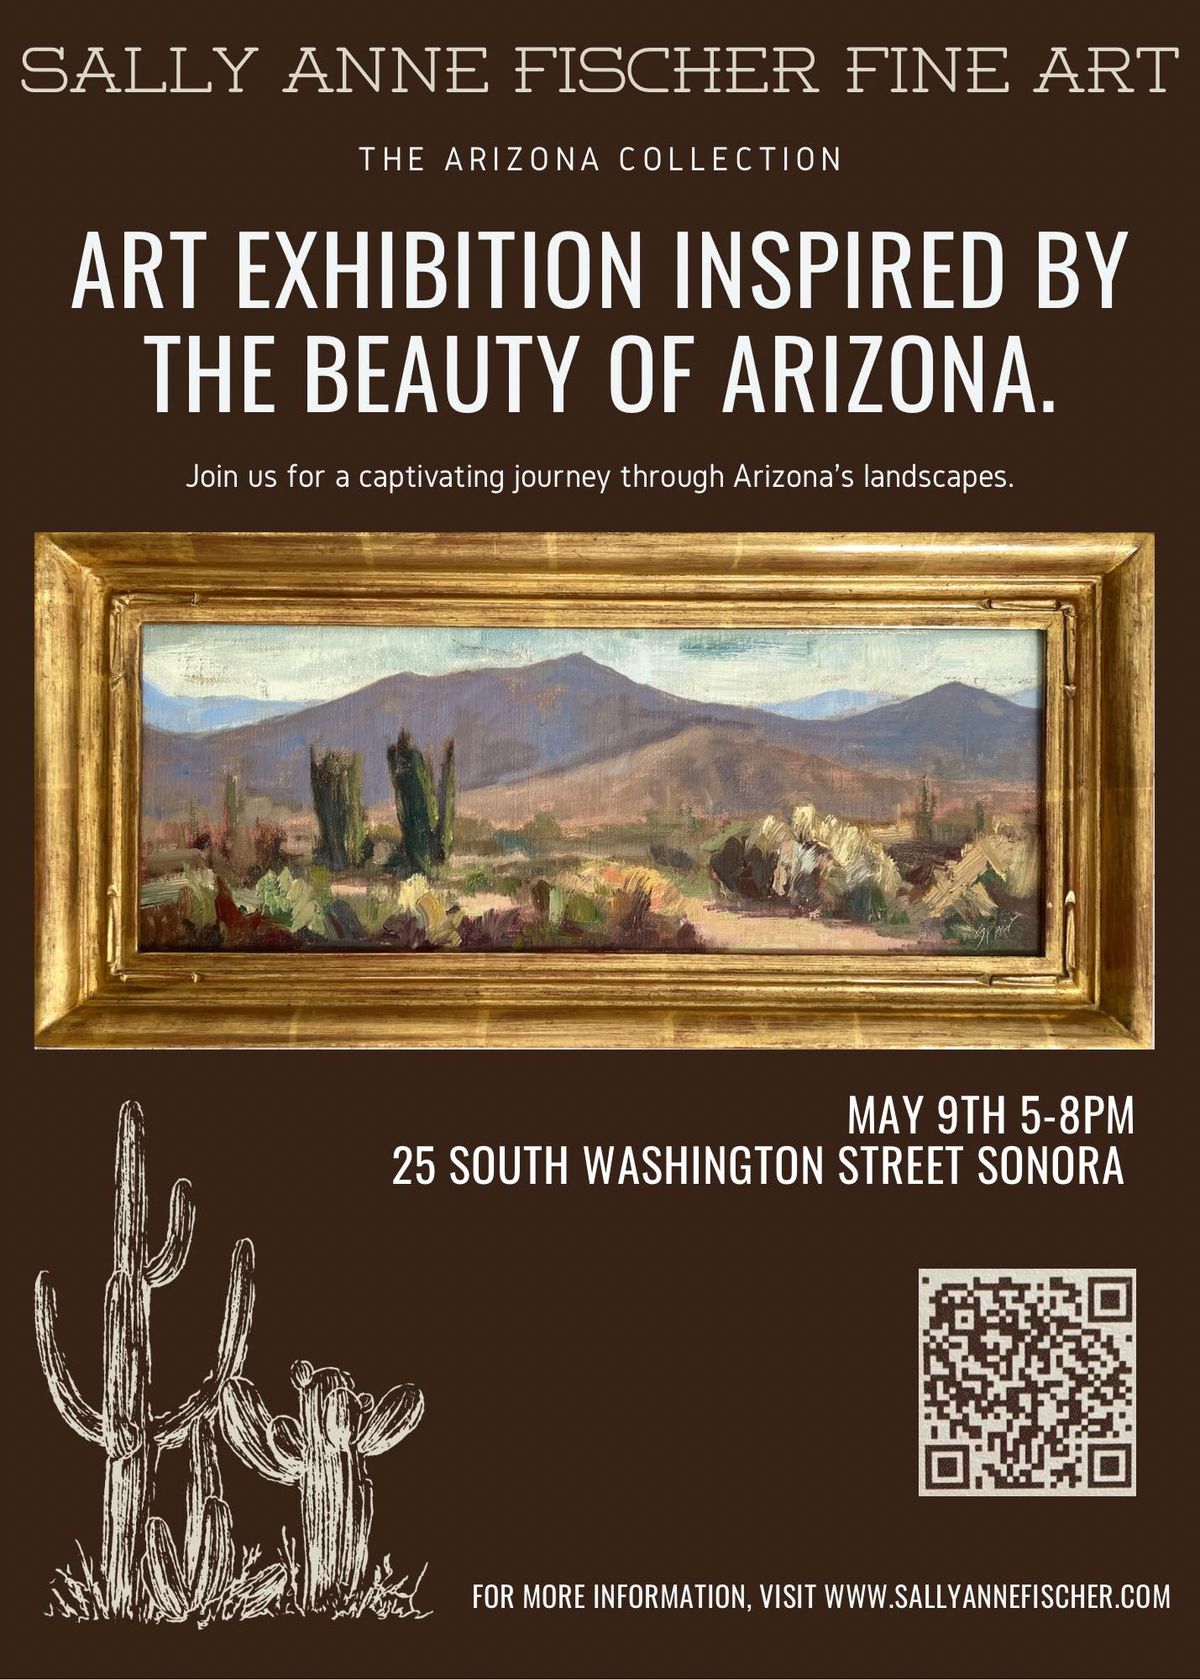 The Arizona Collection Art Exhibition: Reflections on a Road Trip 